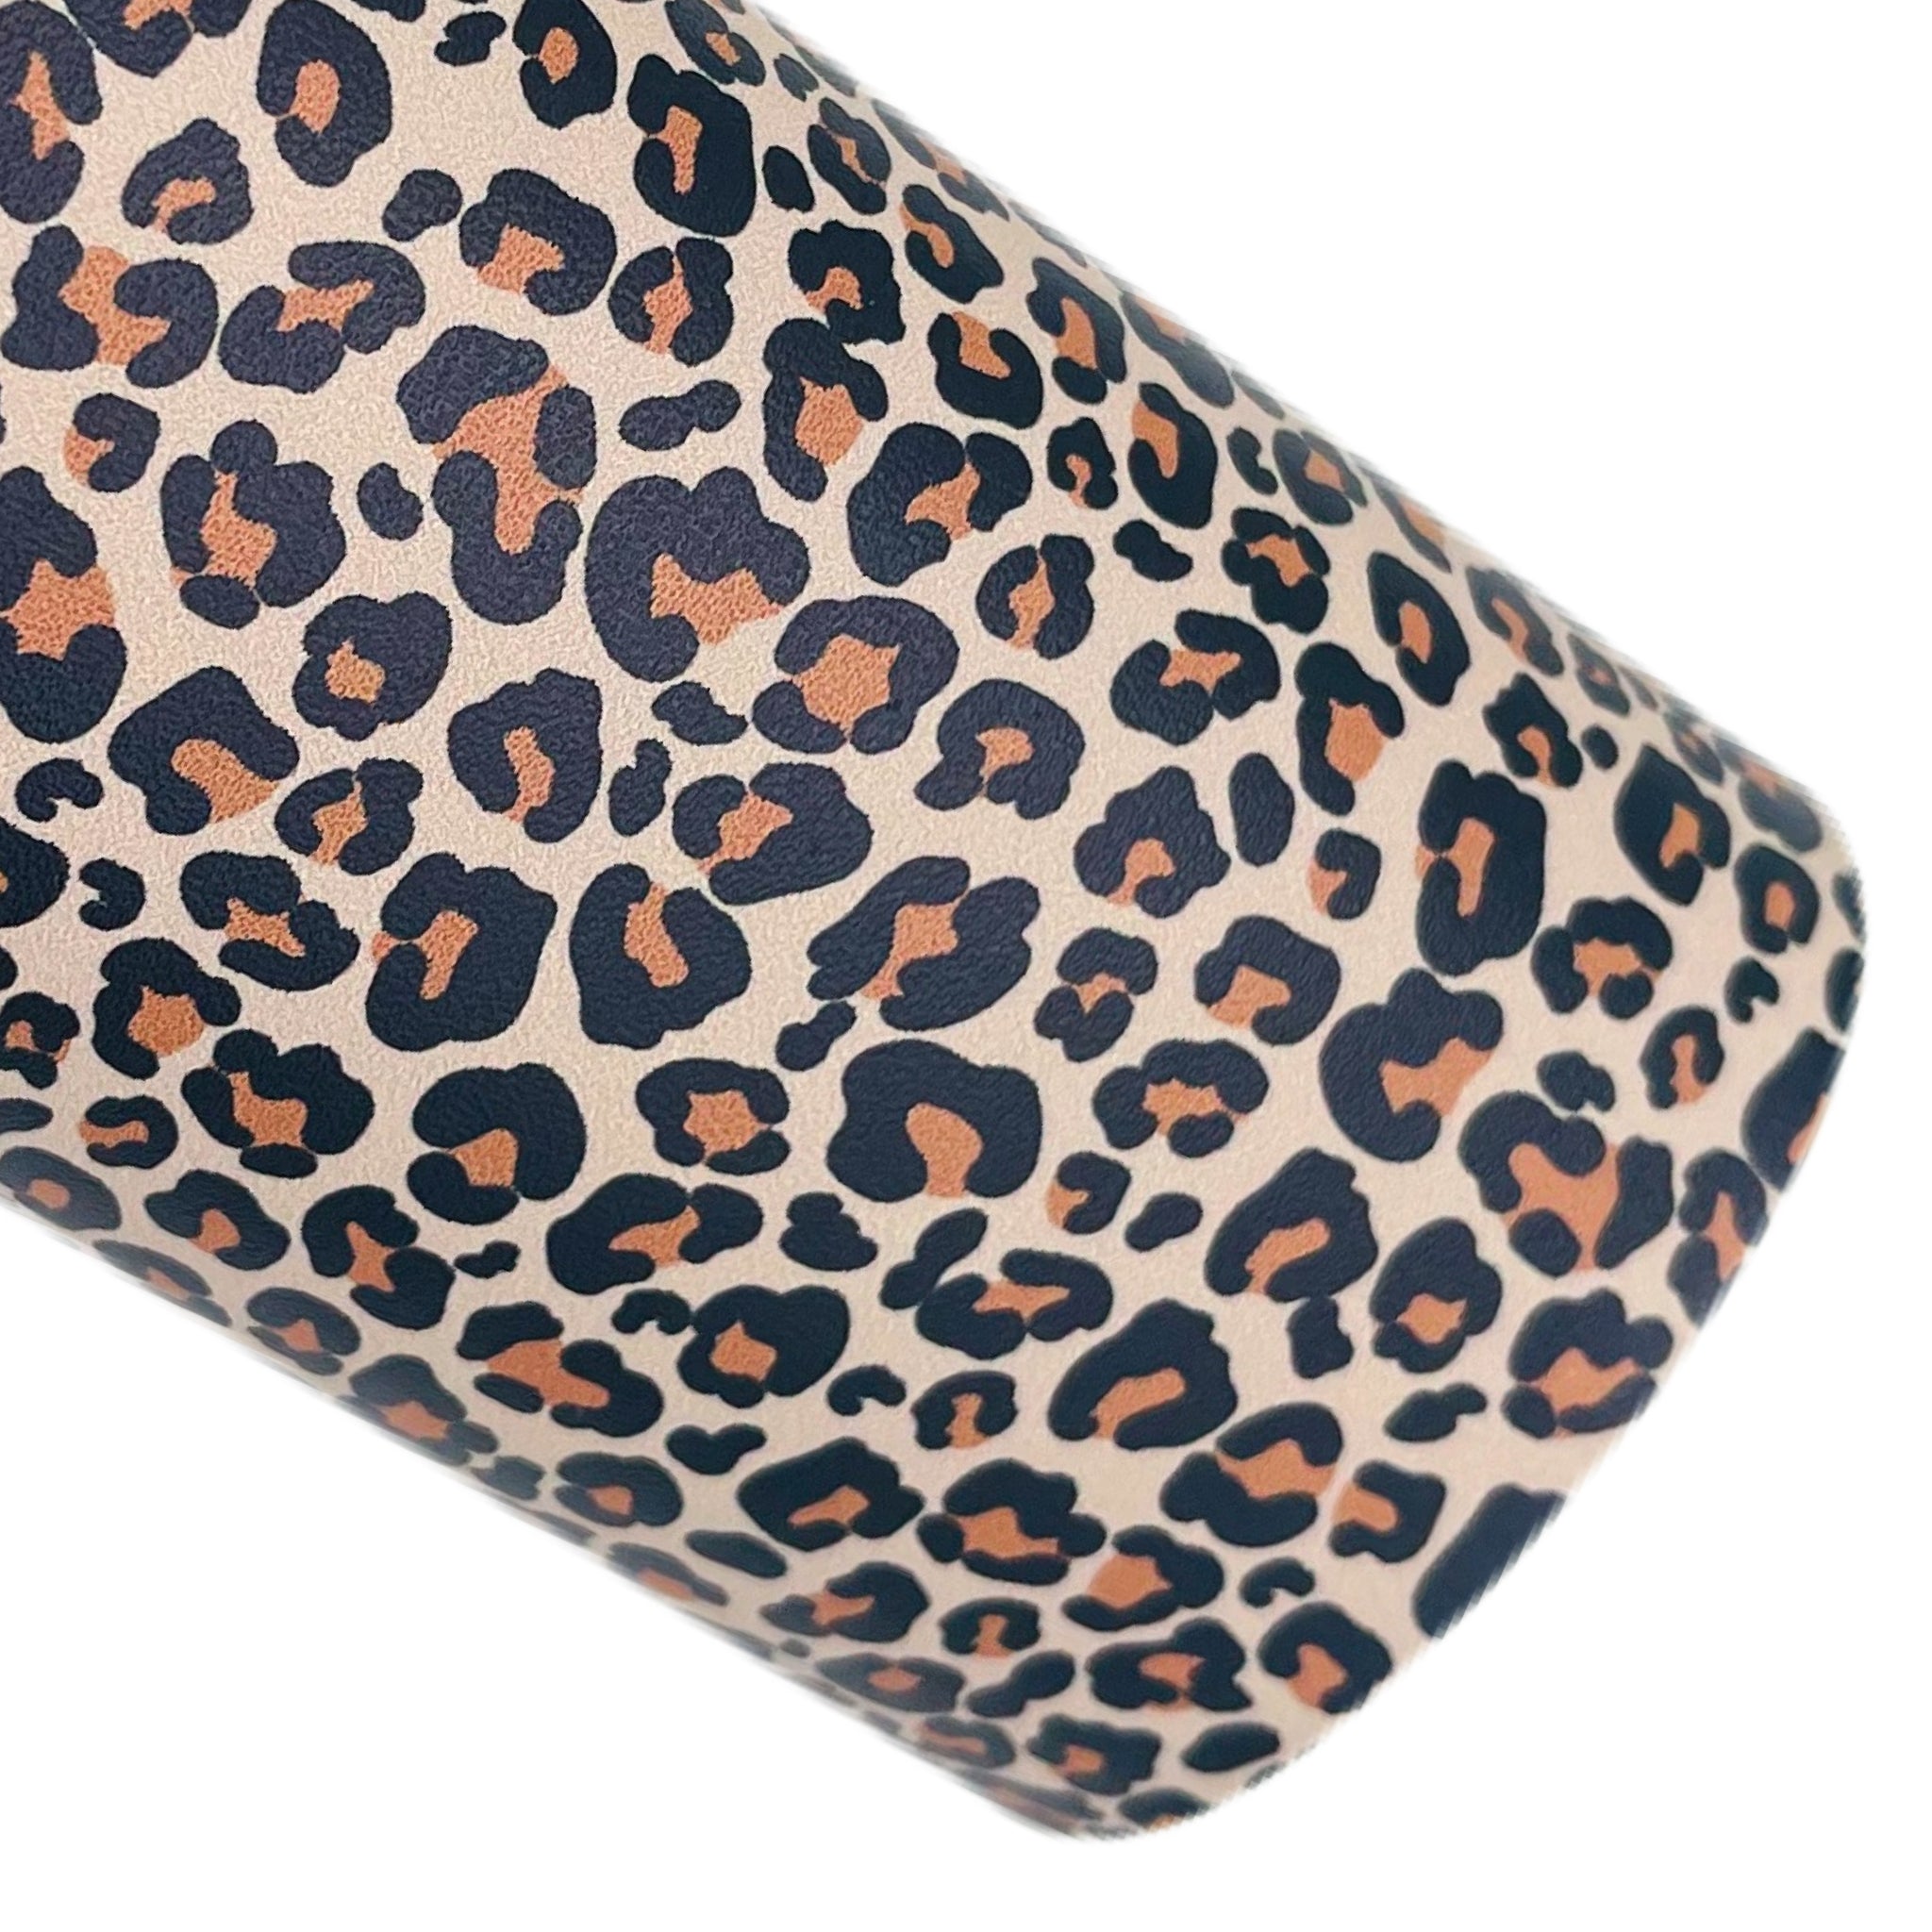 Wildin’ Out Leopard Custom Print on Smooth Faux Leather